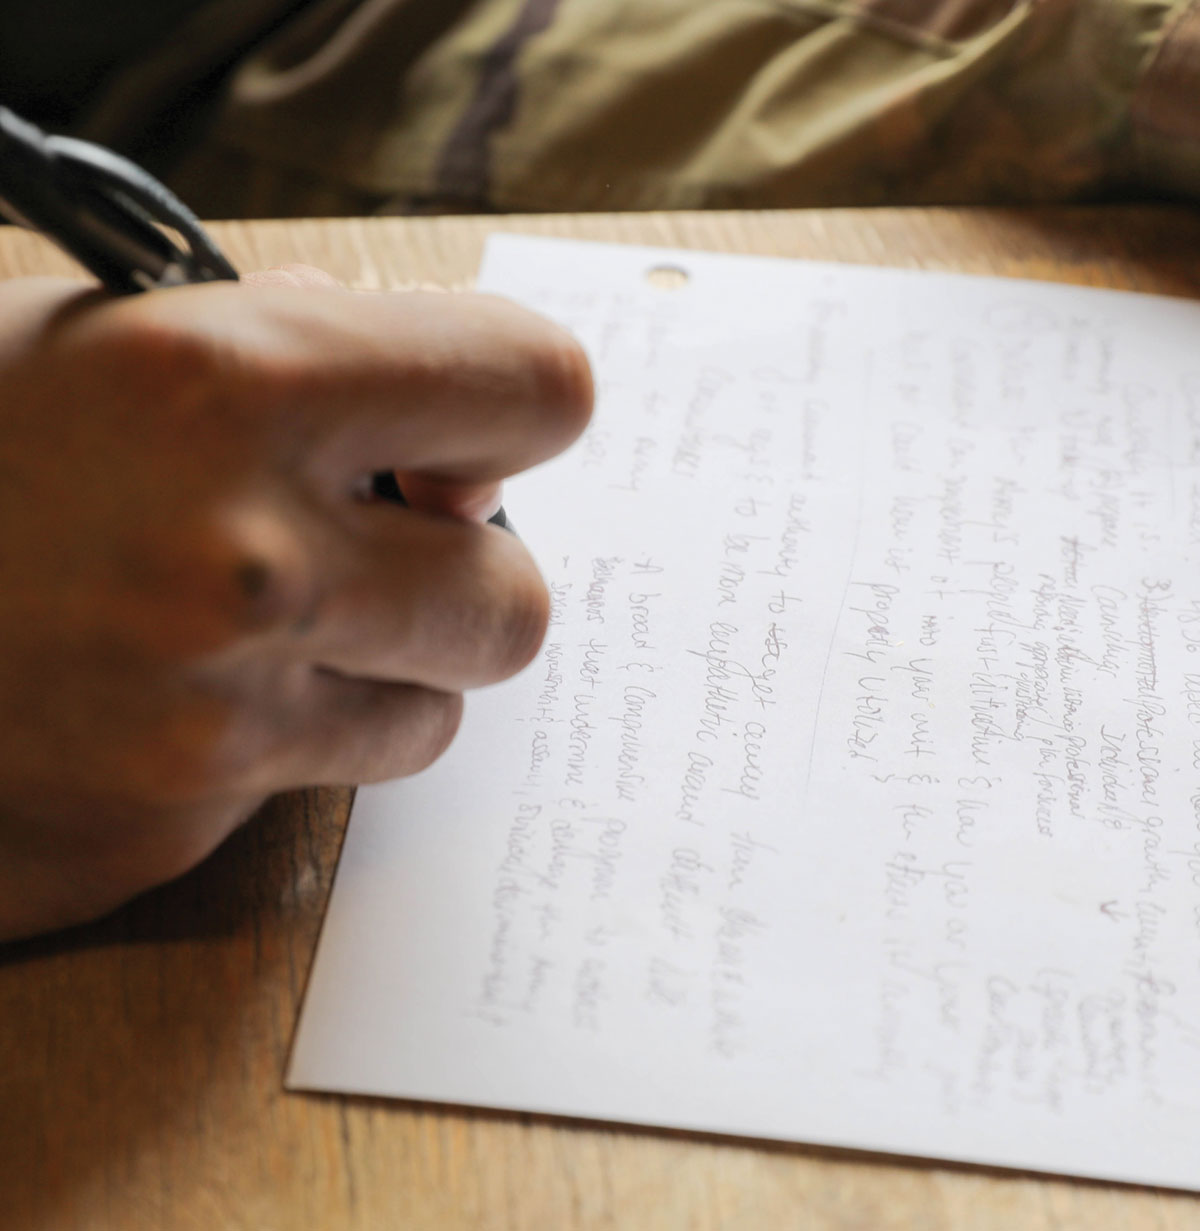 A soldier writes during the essay preparation.